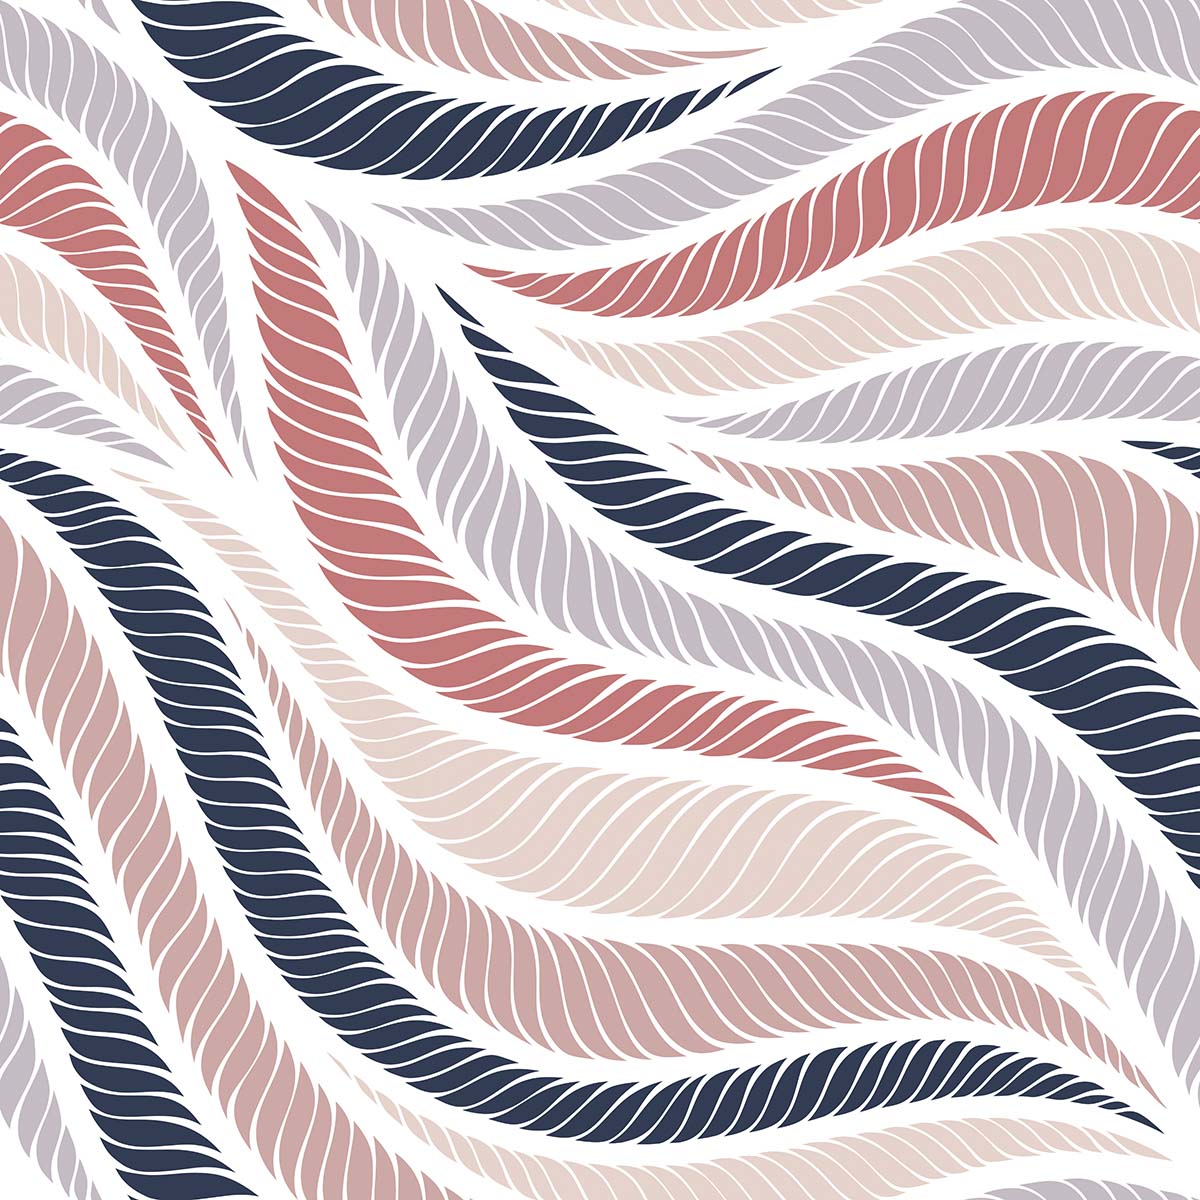 A pattern of wavy lines